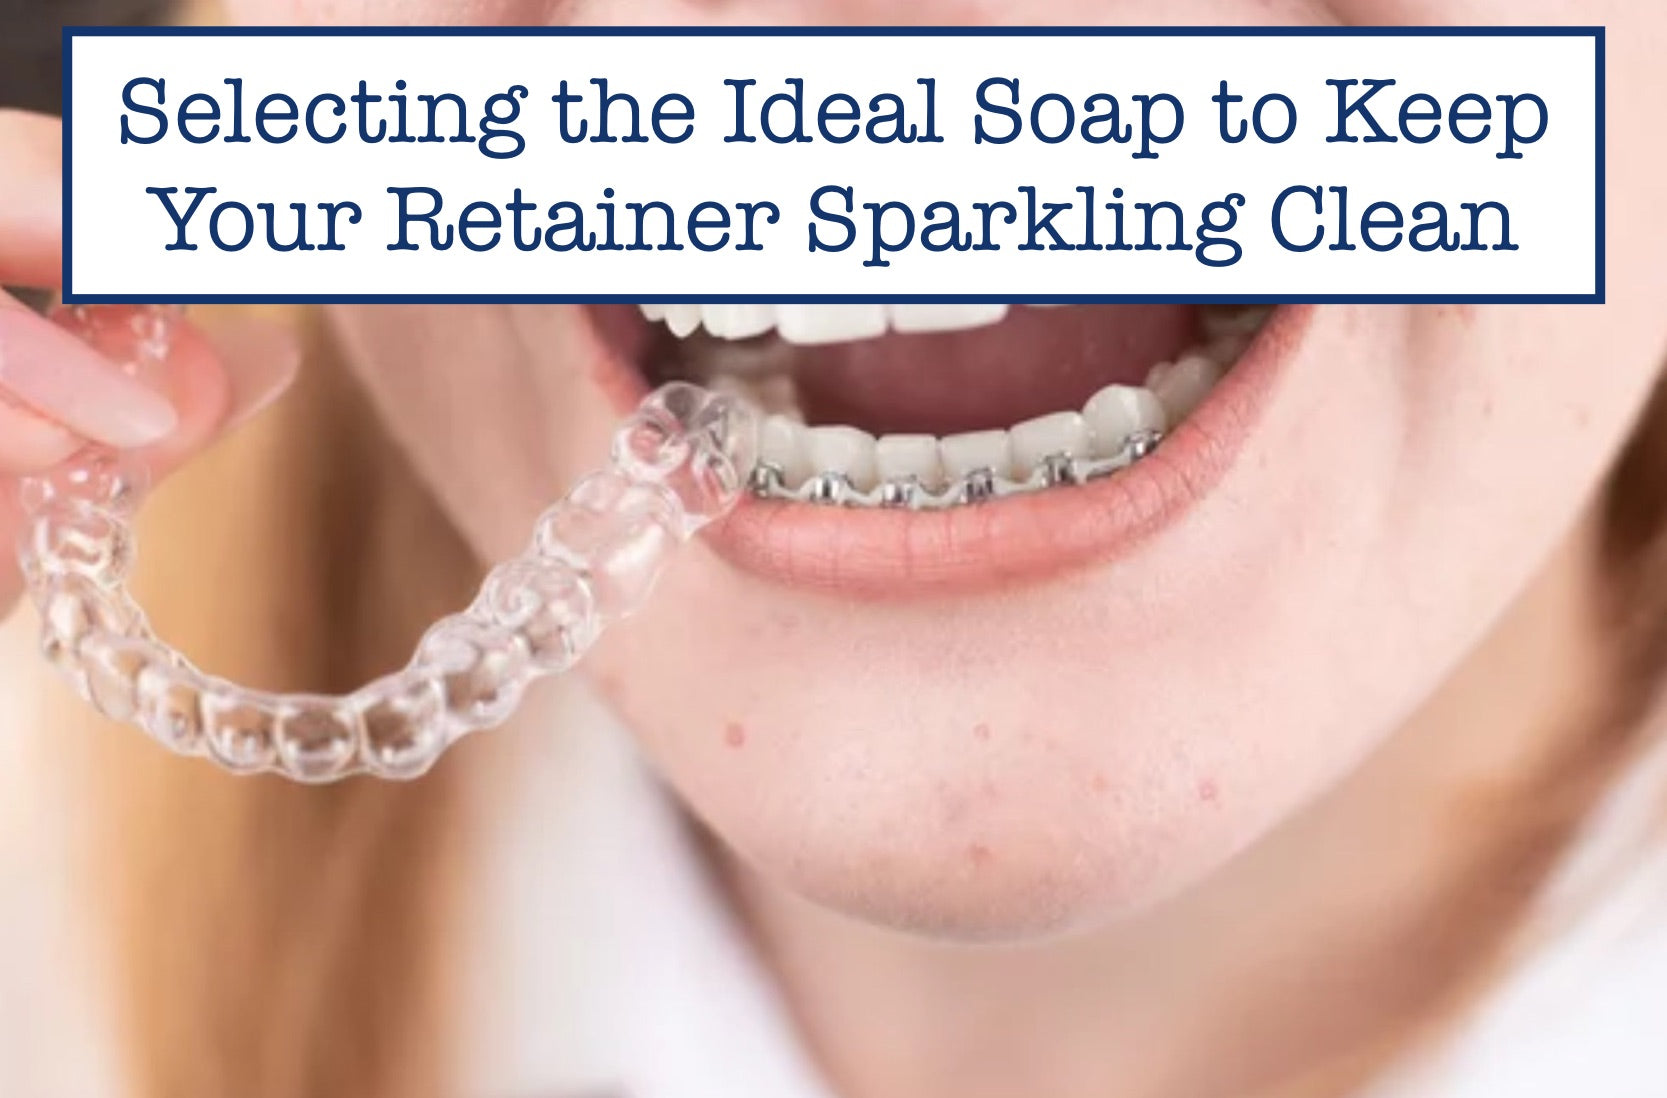 Selecting the Ideal Soap to Keep Your Retainer Sparkling Clean